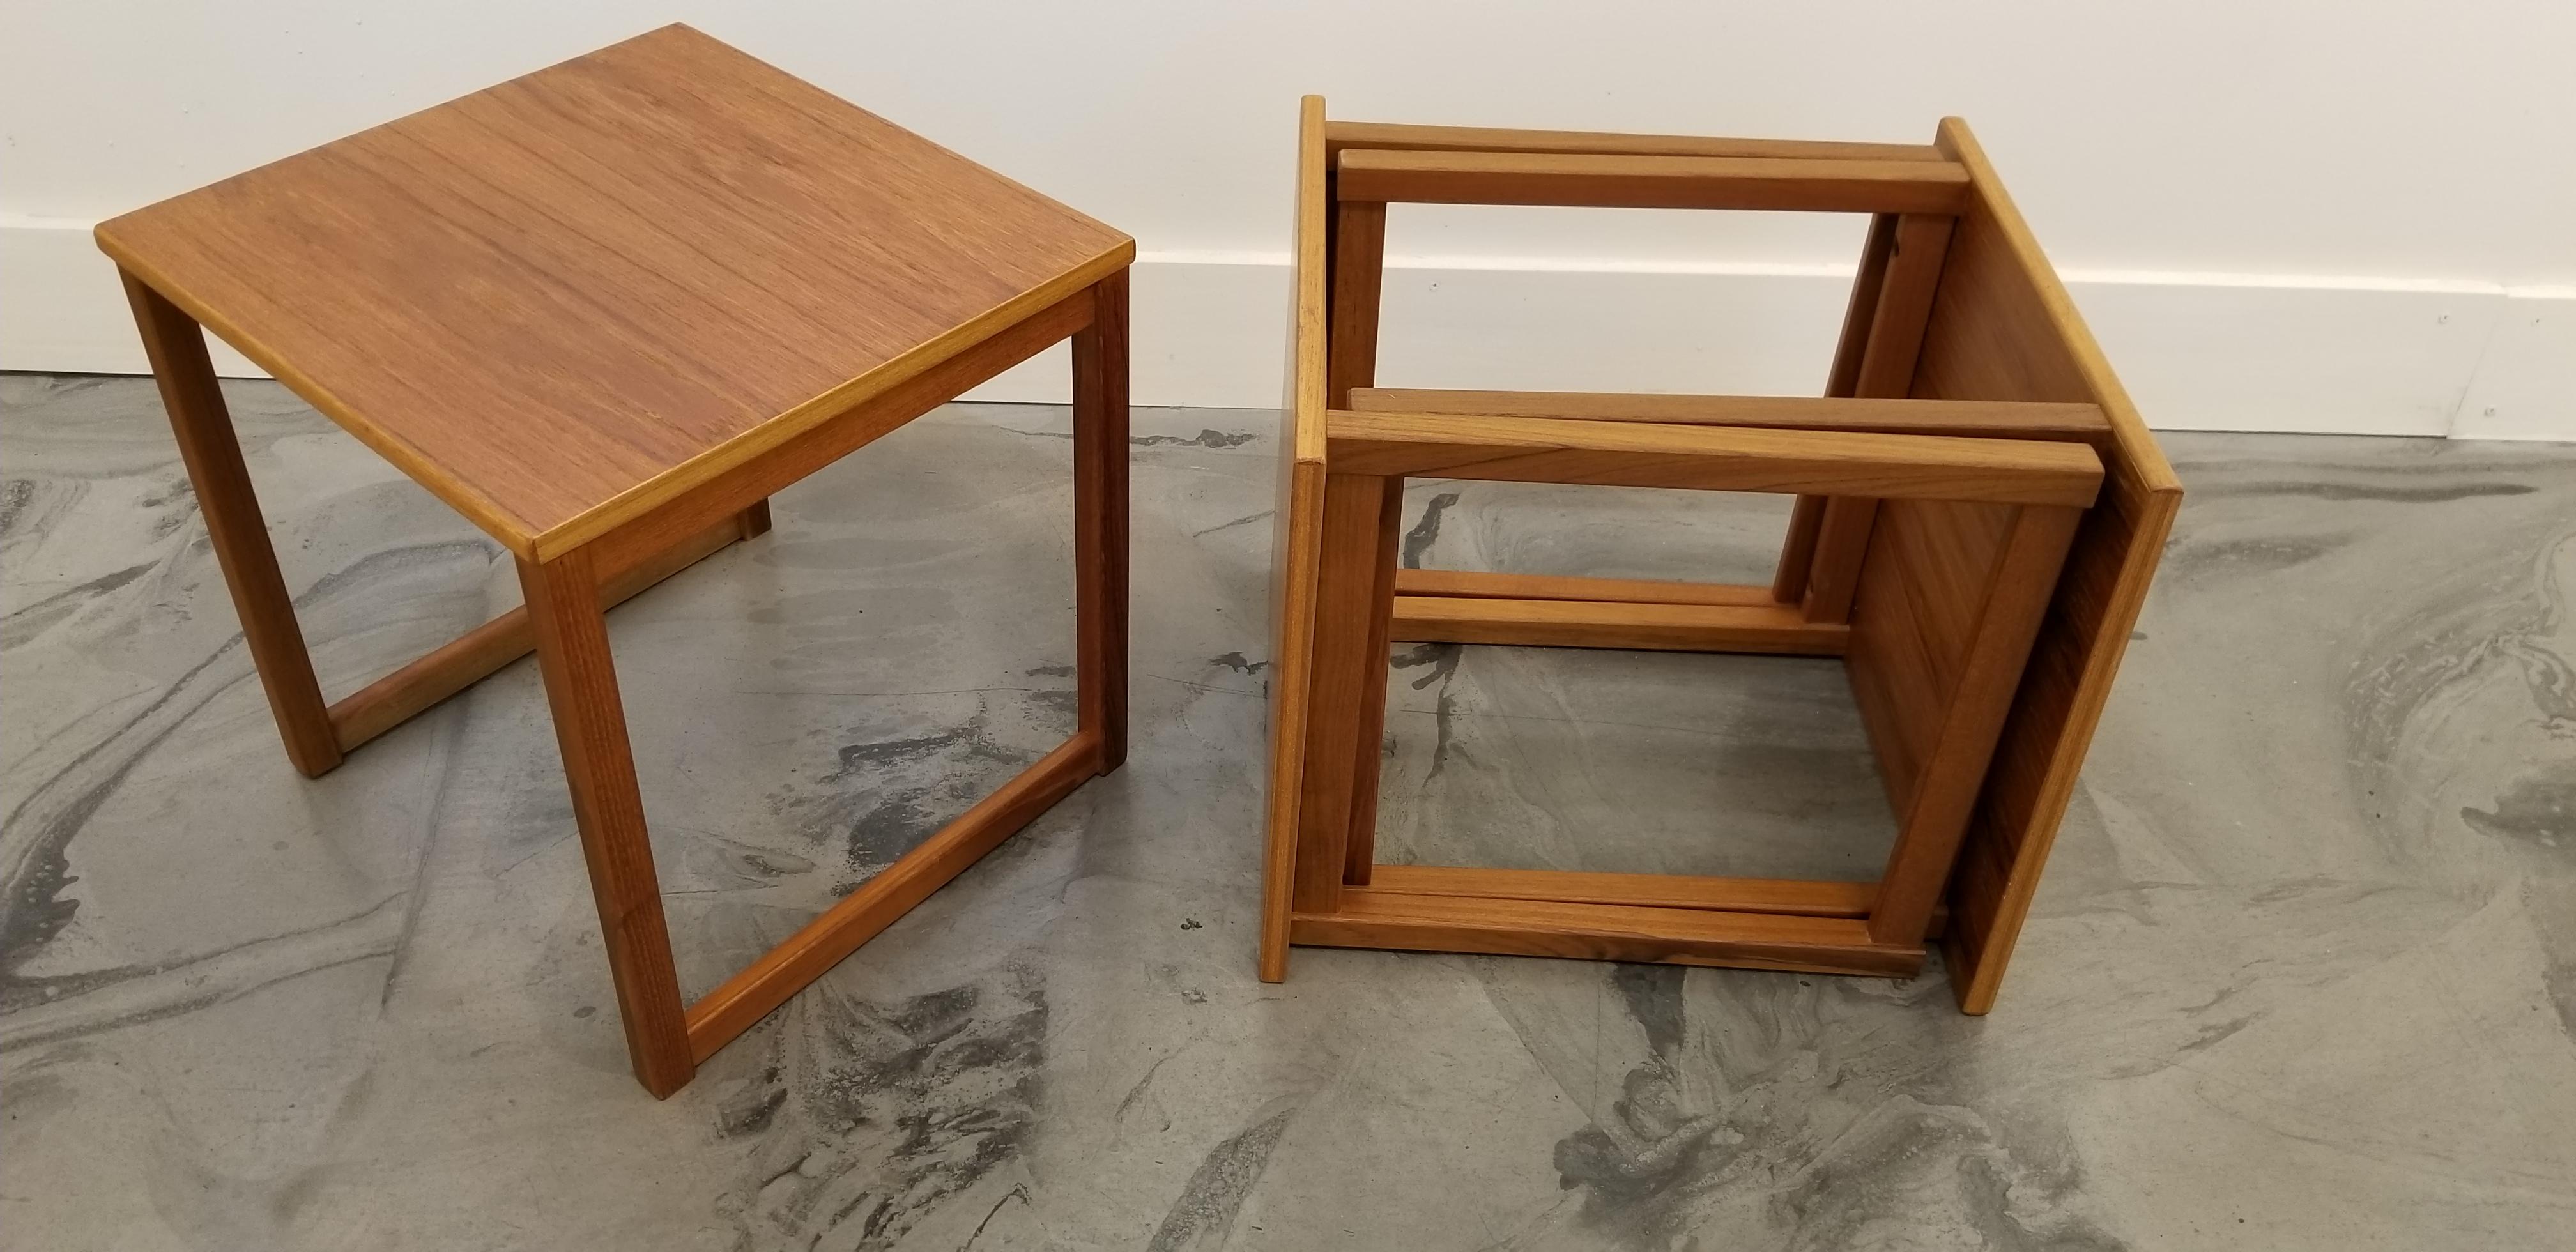 A versatile set of 3 Danish modern teak end tables nesting into a space-saving single cubical end table. Optional use as a set of 3 tables, a coffee table or a small coffee table and single end table set. Notice detailed book-matched wood grain to